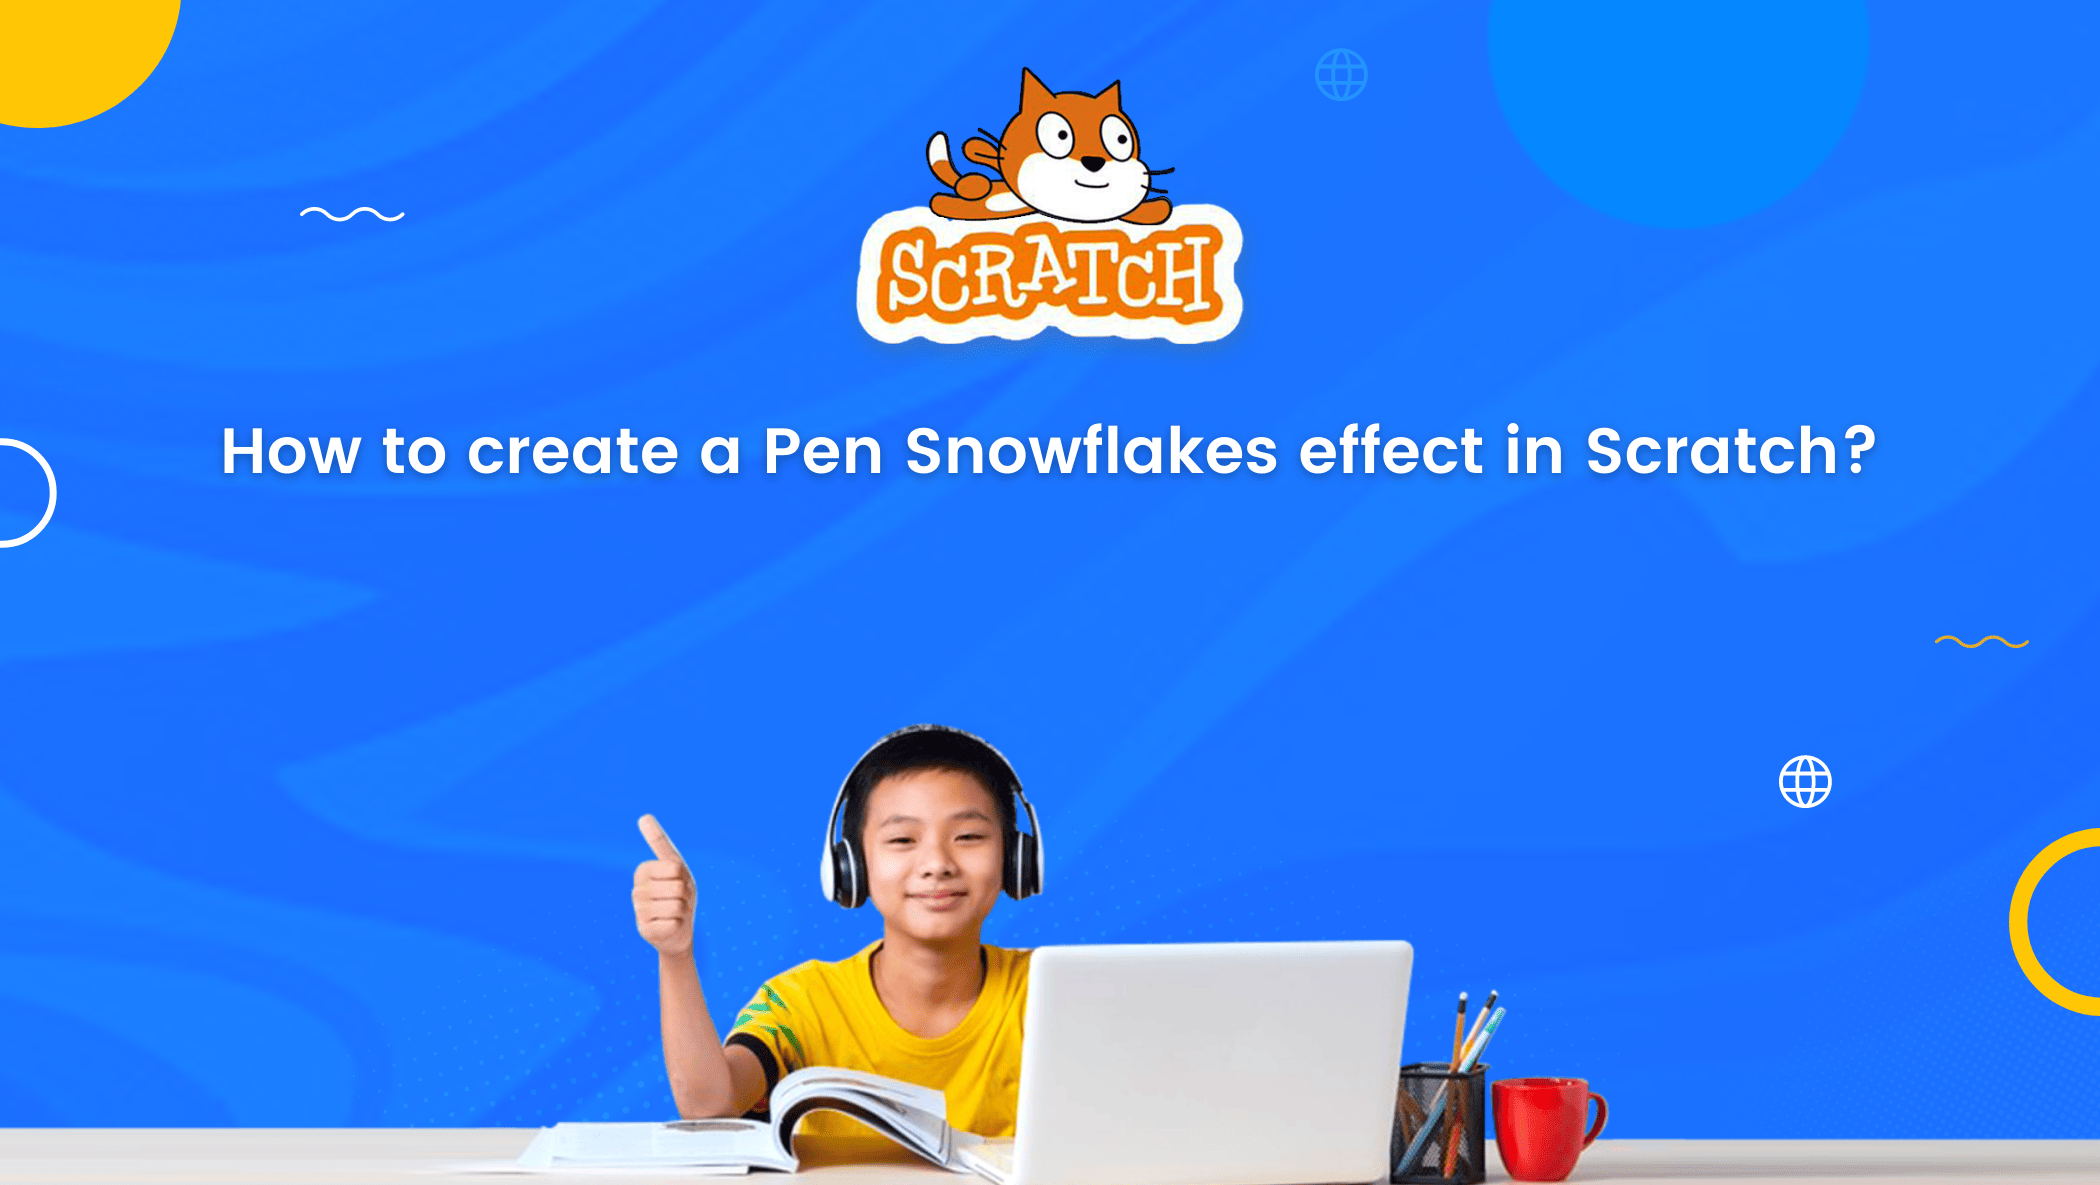 How to create a Pen Snowflakes effect in Scratch